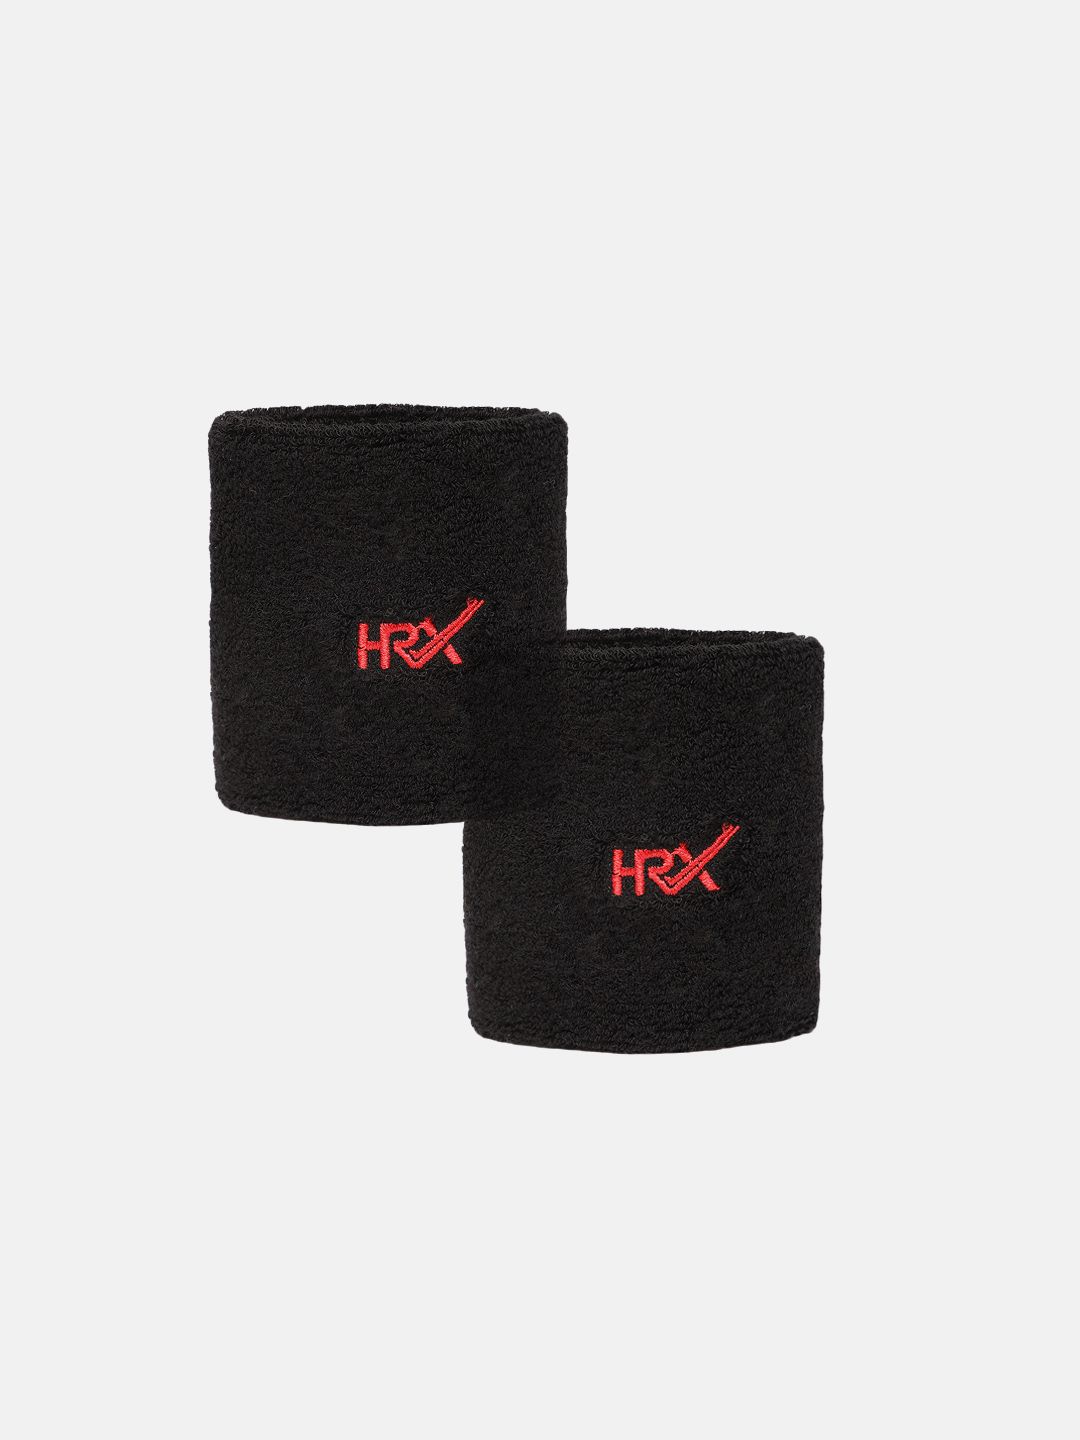 HRX by Hrithik Roshan Unisex Set of 2 Black Performance Wristbands Price in India